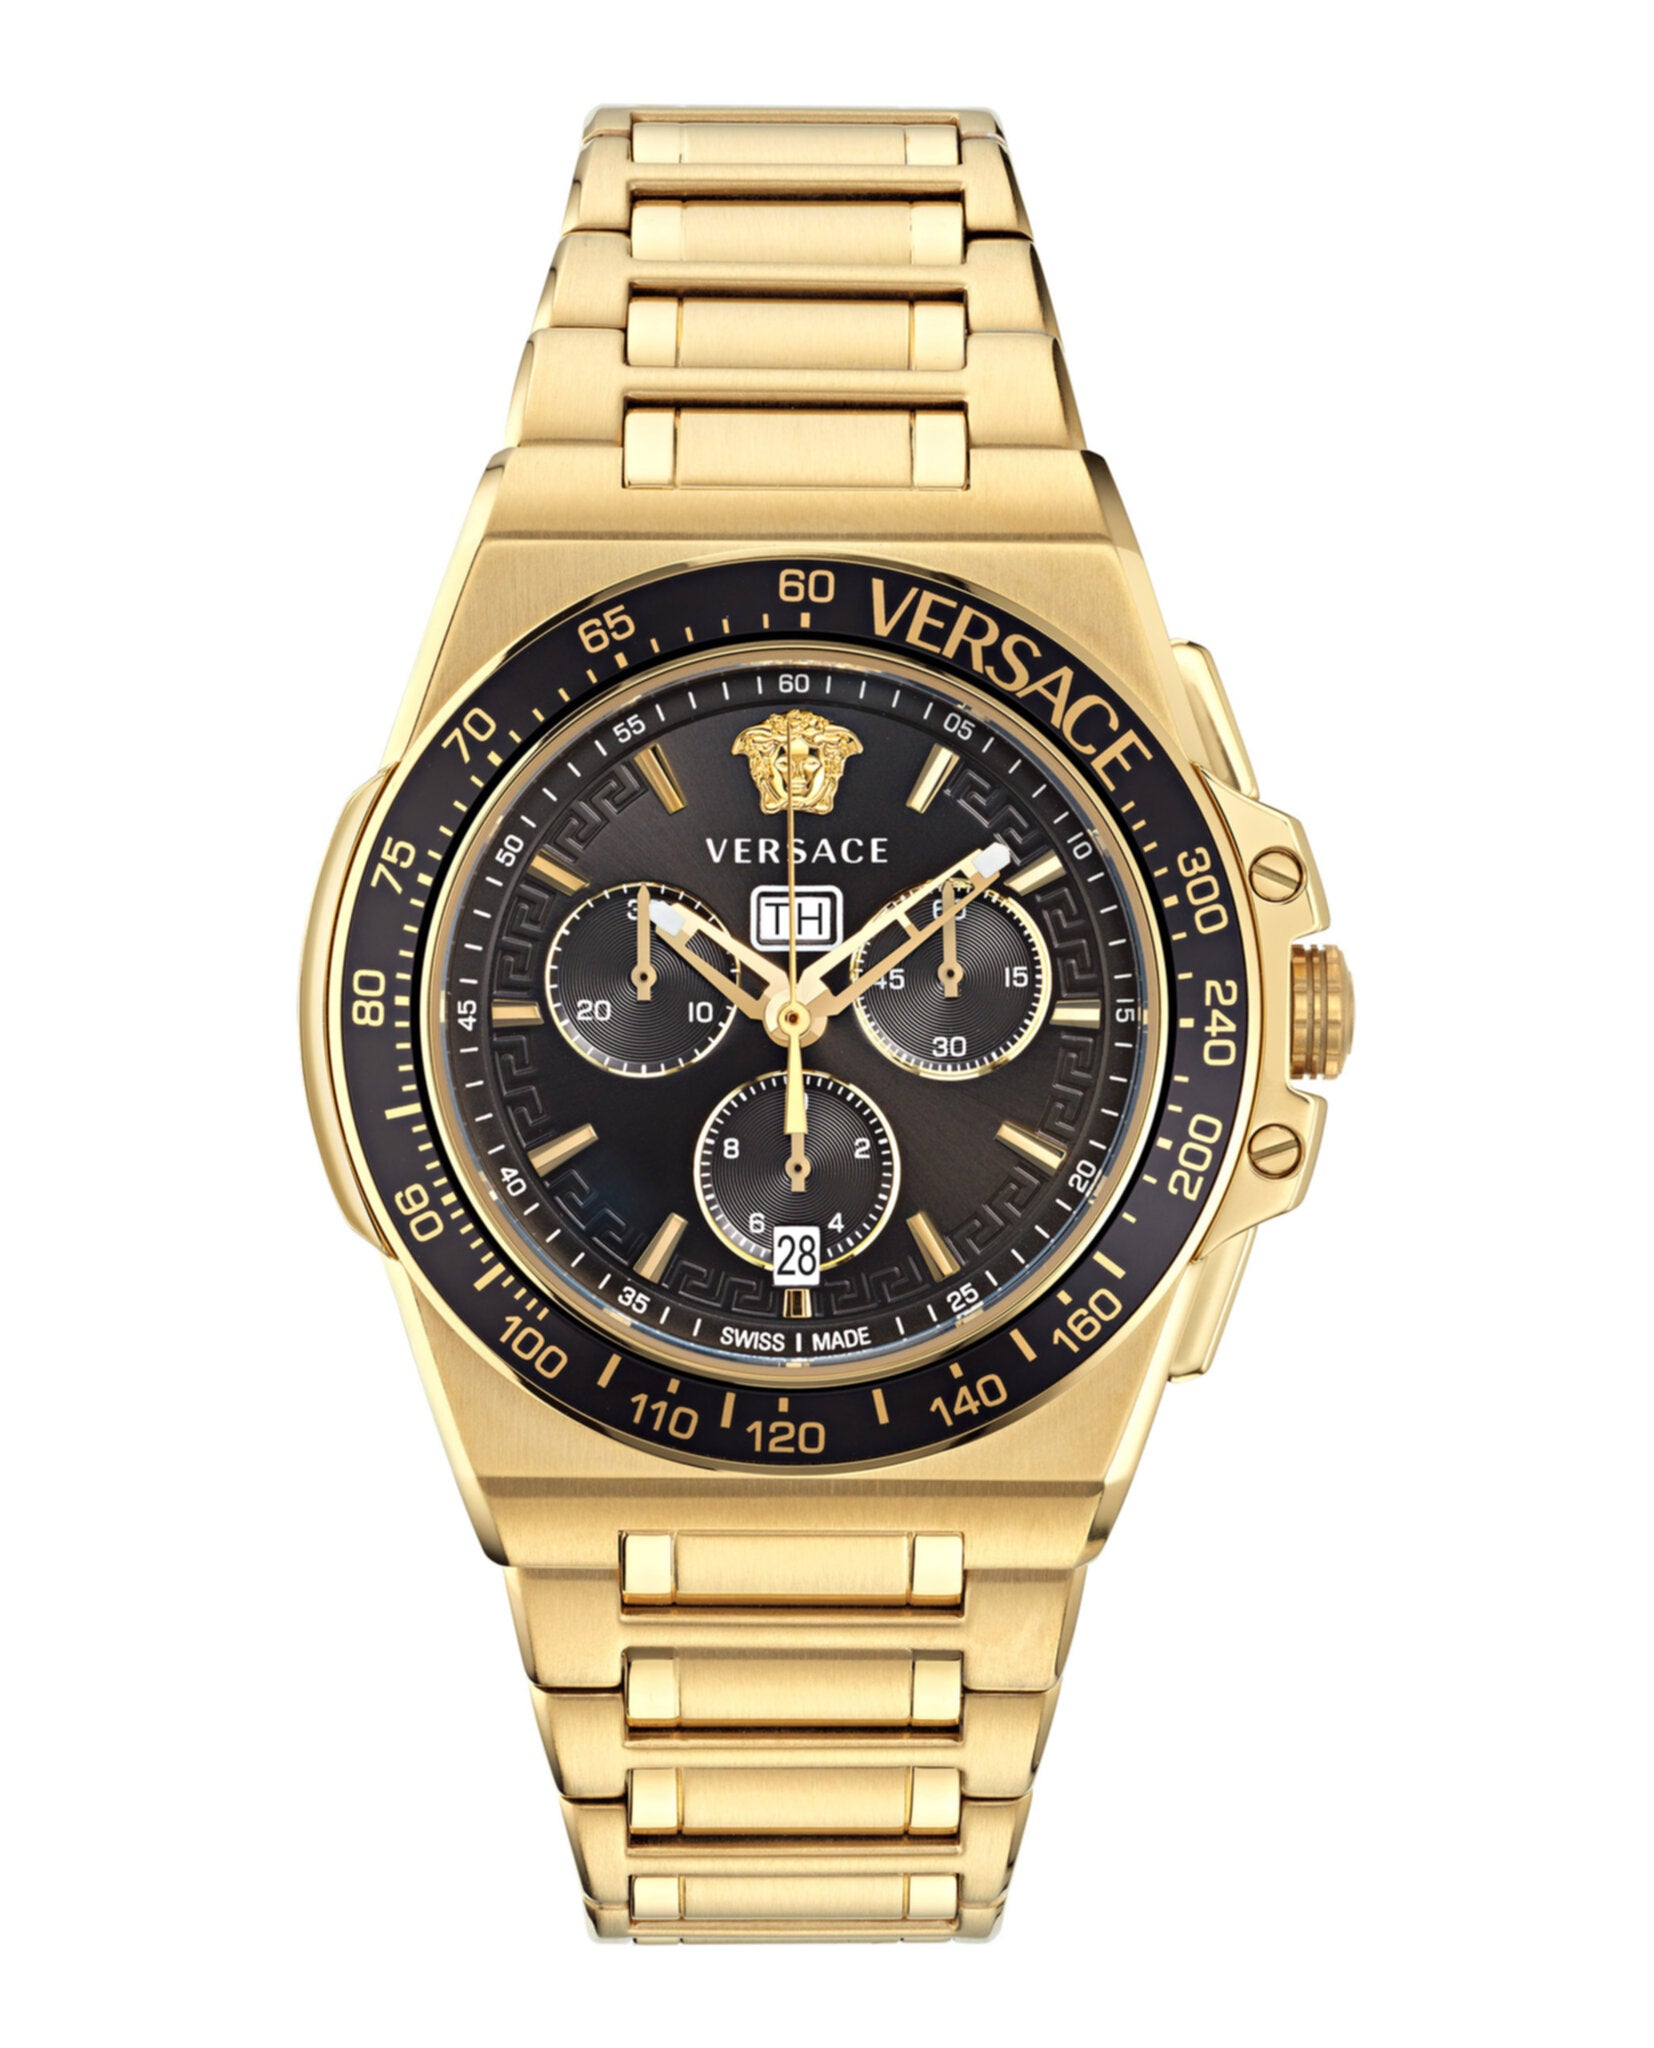 Time Time Extreme Versace Watches Mens – Madaluxe | Chrono Greca MadaLuxe